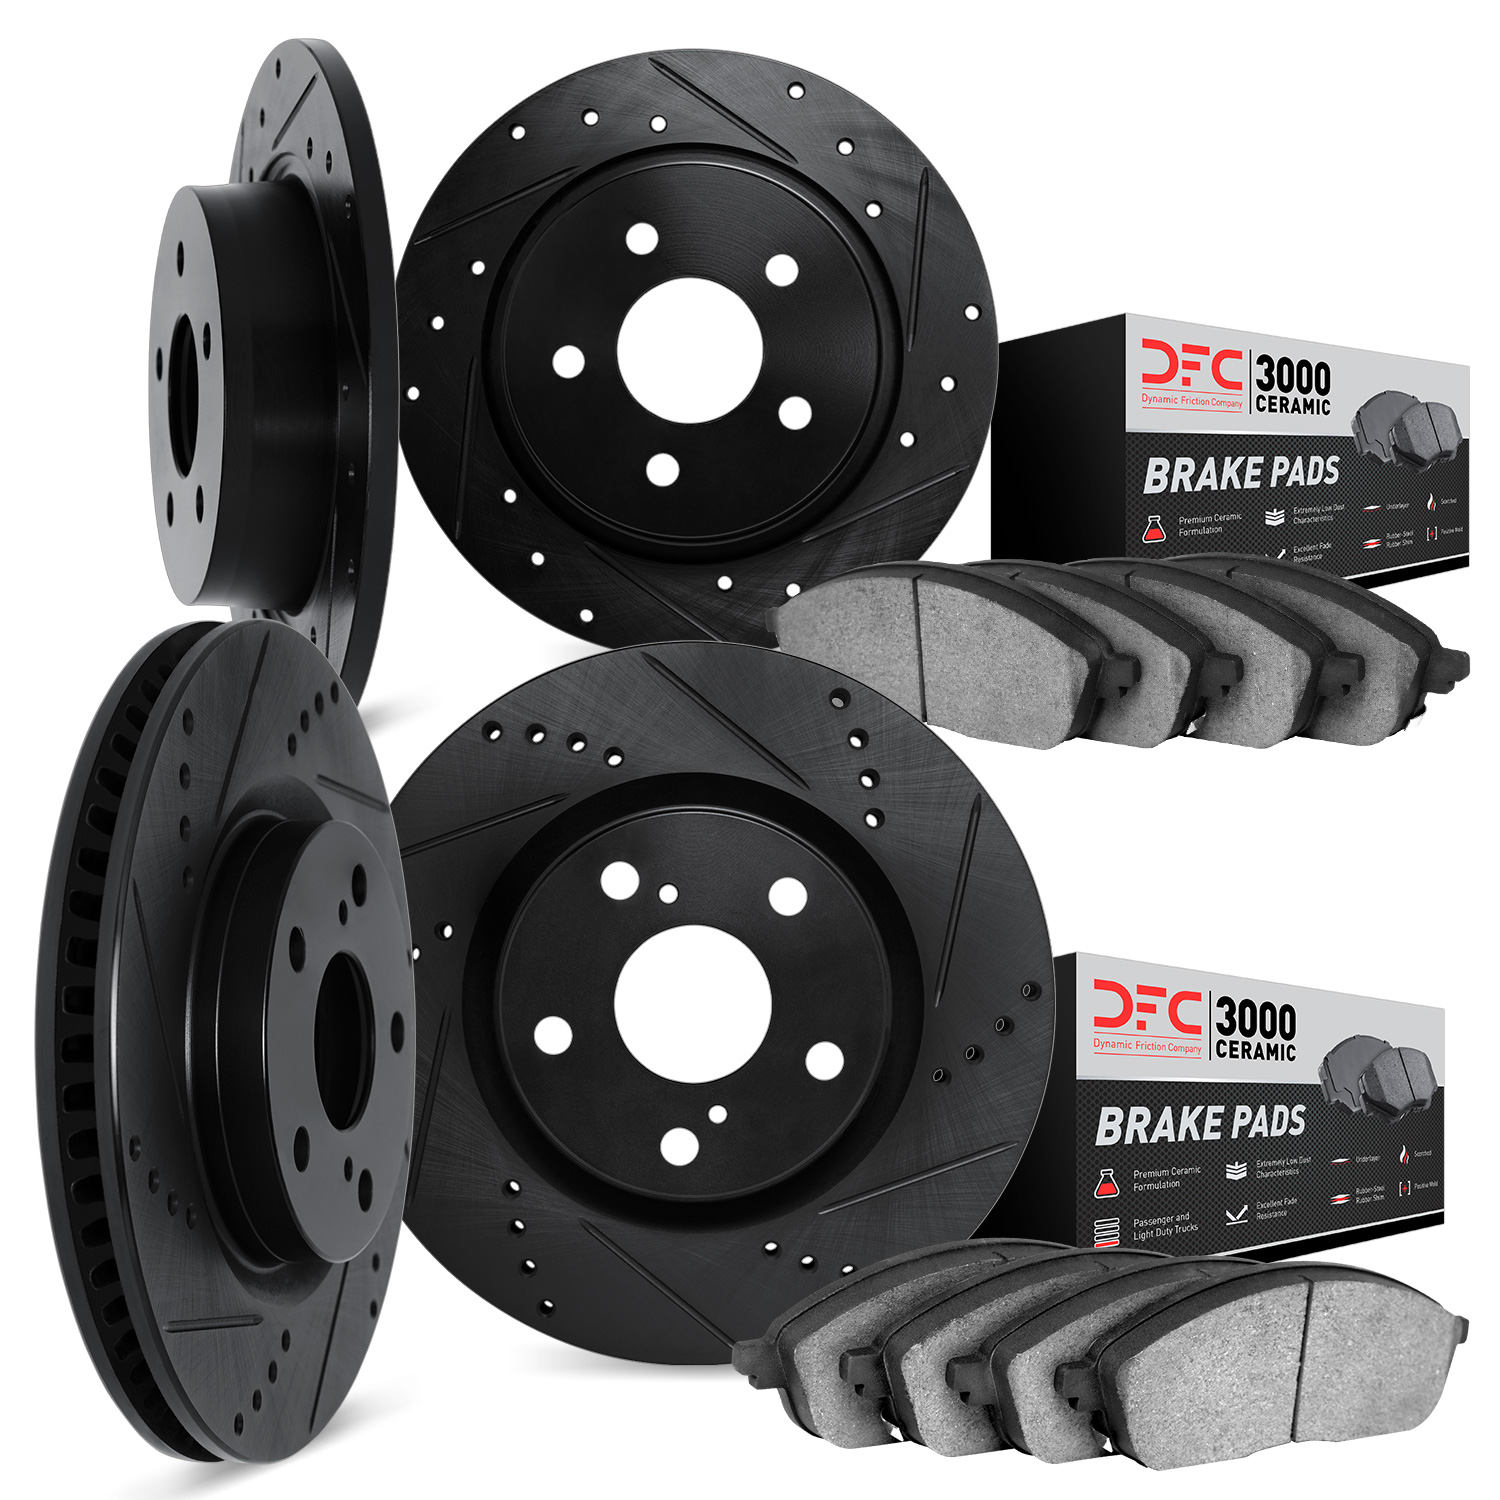 8304-59078 Drilled/Slotted Brake Rotors with 3000-Series Ceramic Brake Pads Kit [Black], Fits Select Acura/Honda, Position: Fron